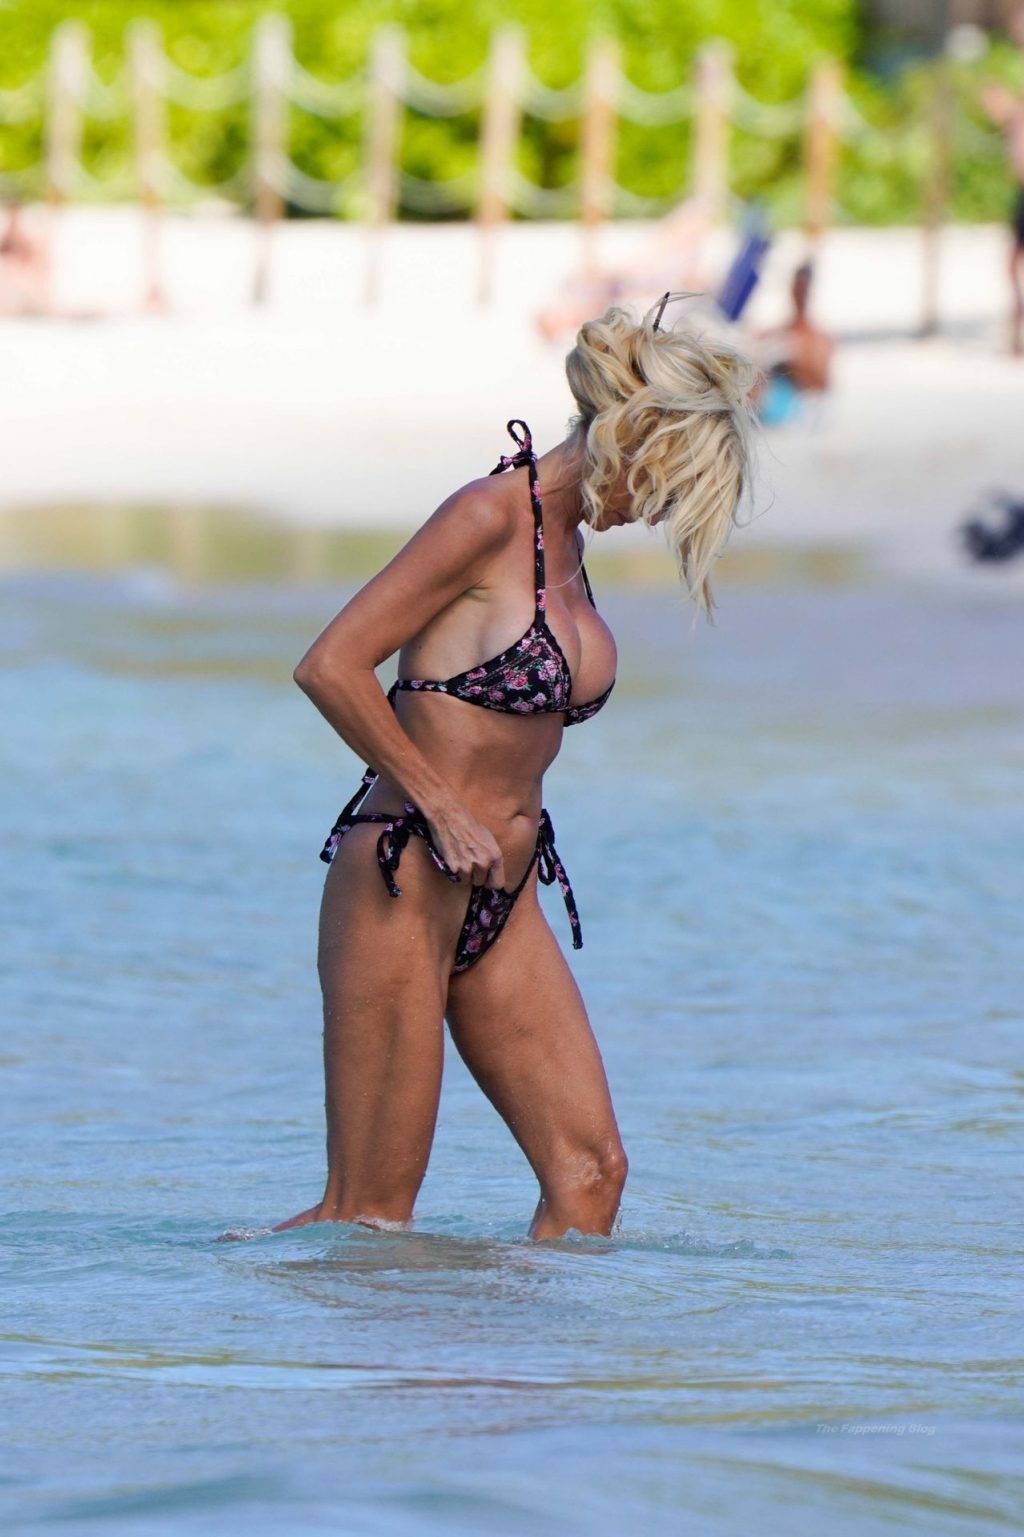 Victoria Silvstedt Flaunts Her Fit MILF Body on the Beach (40 Photos)